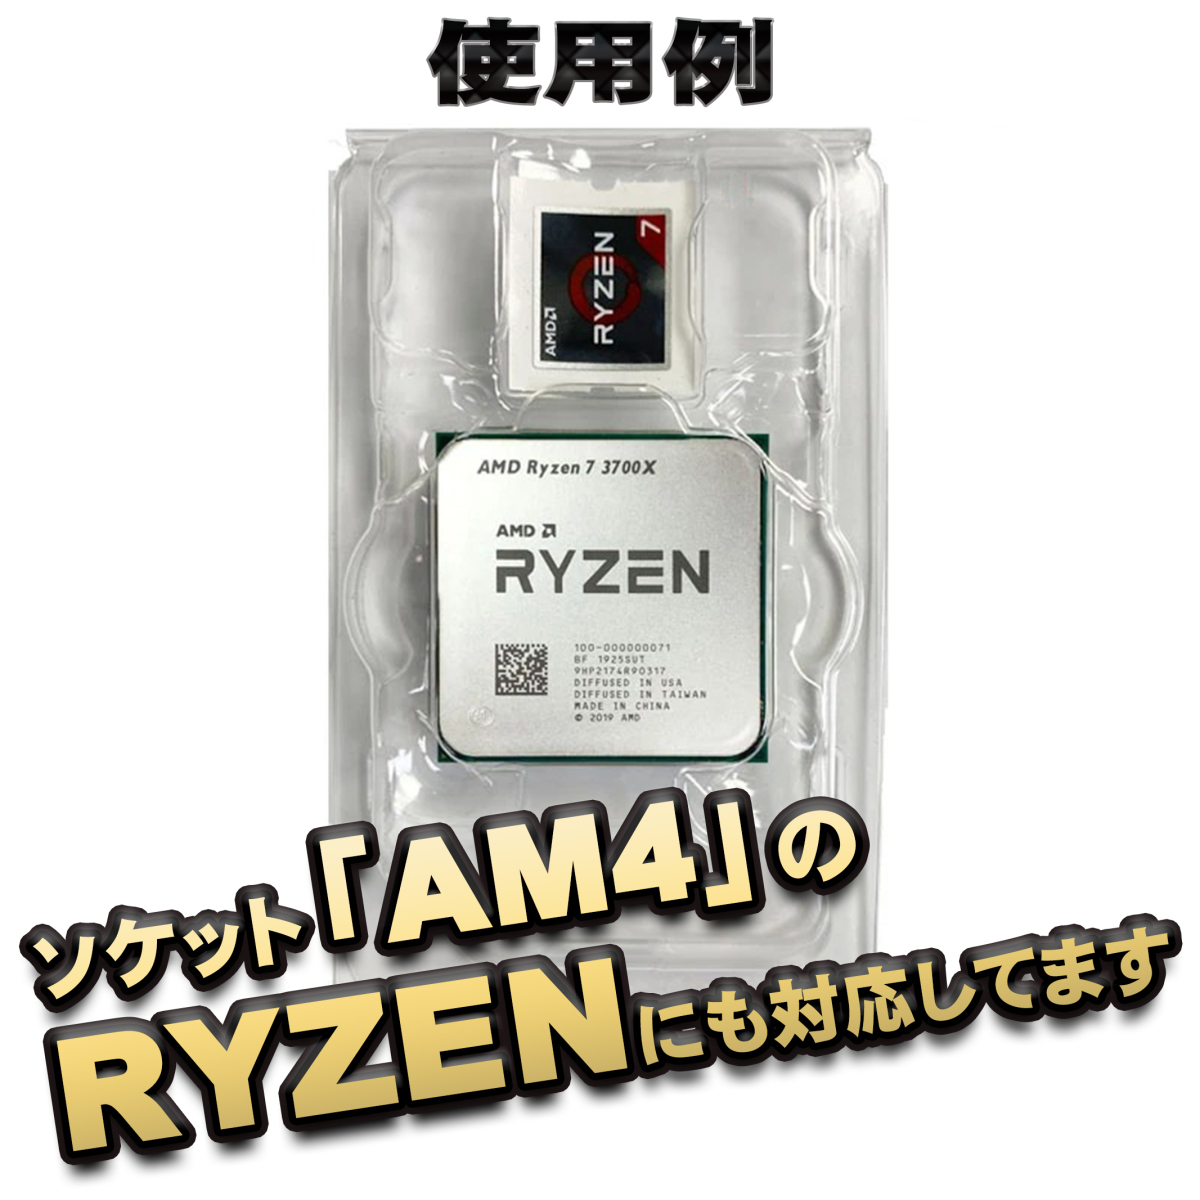 [ fm1 correspondence ]CPU shell case AMD for plastic [AM4. RYZEN also correspondence ] storage storage case 10 pieces set 